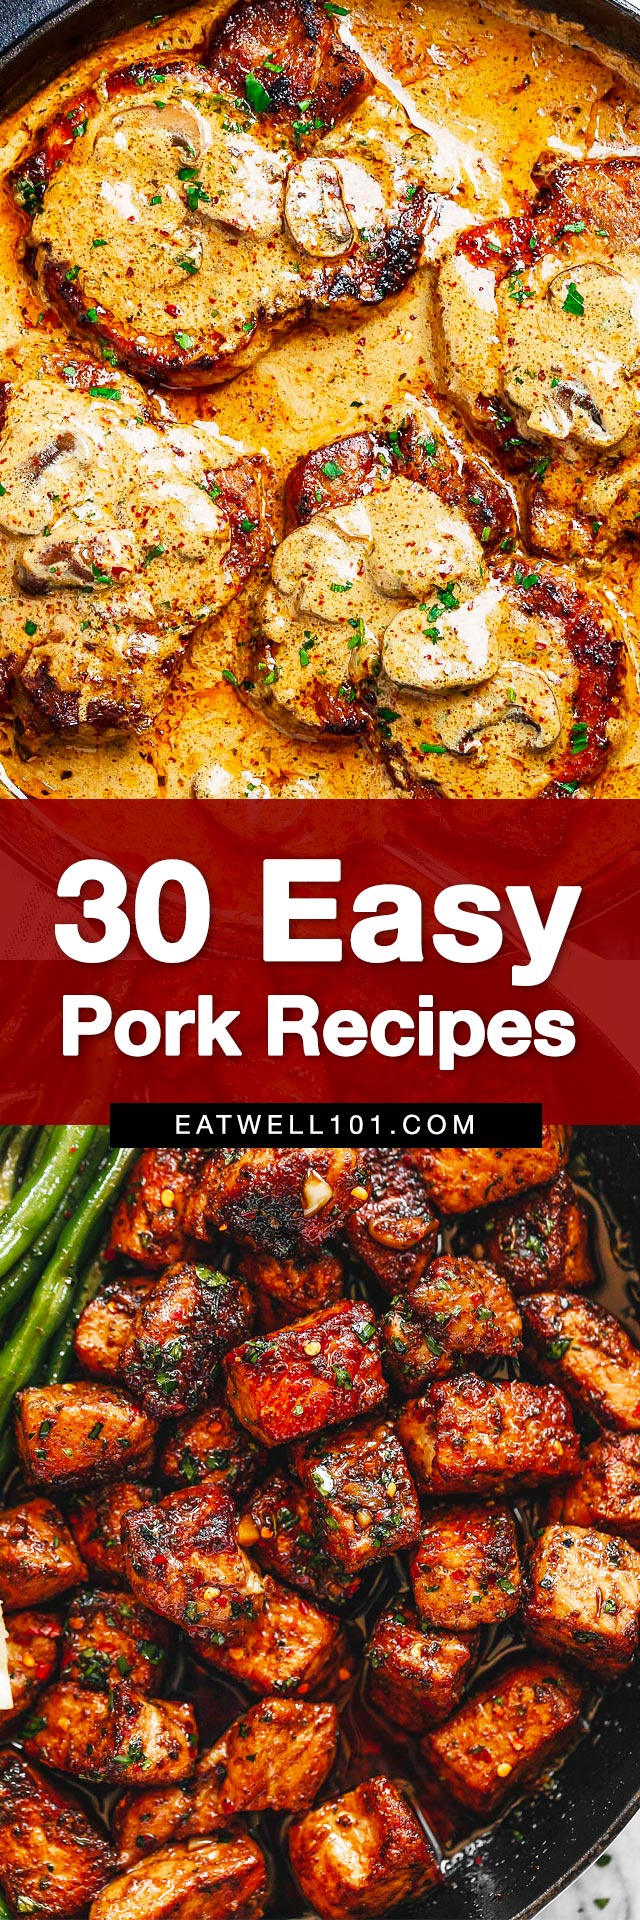 Easy Pork Recipe - #pork #recipes #eatwell101 - These pork recipes are sure to put the other white meat in your weeknight dinner rotation.